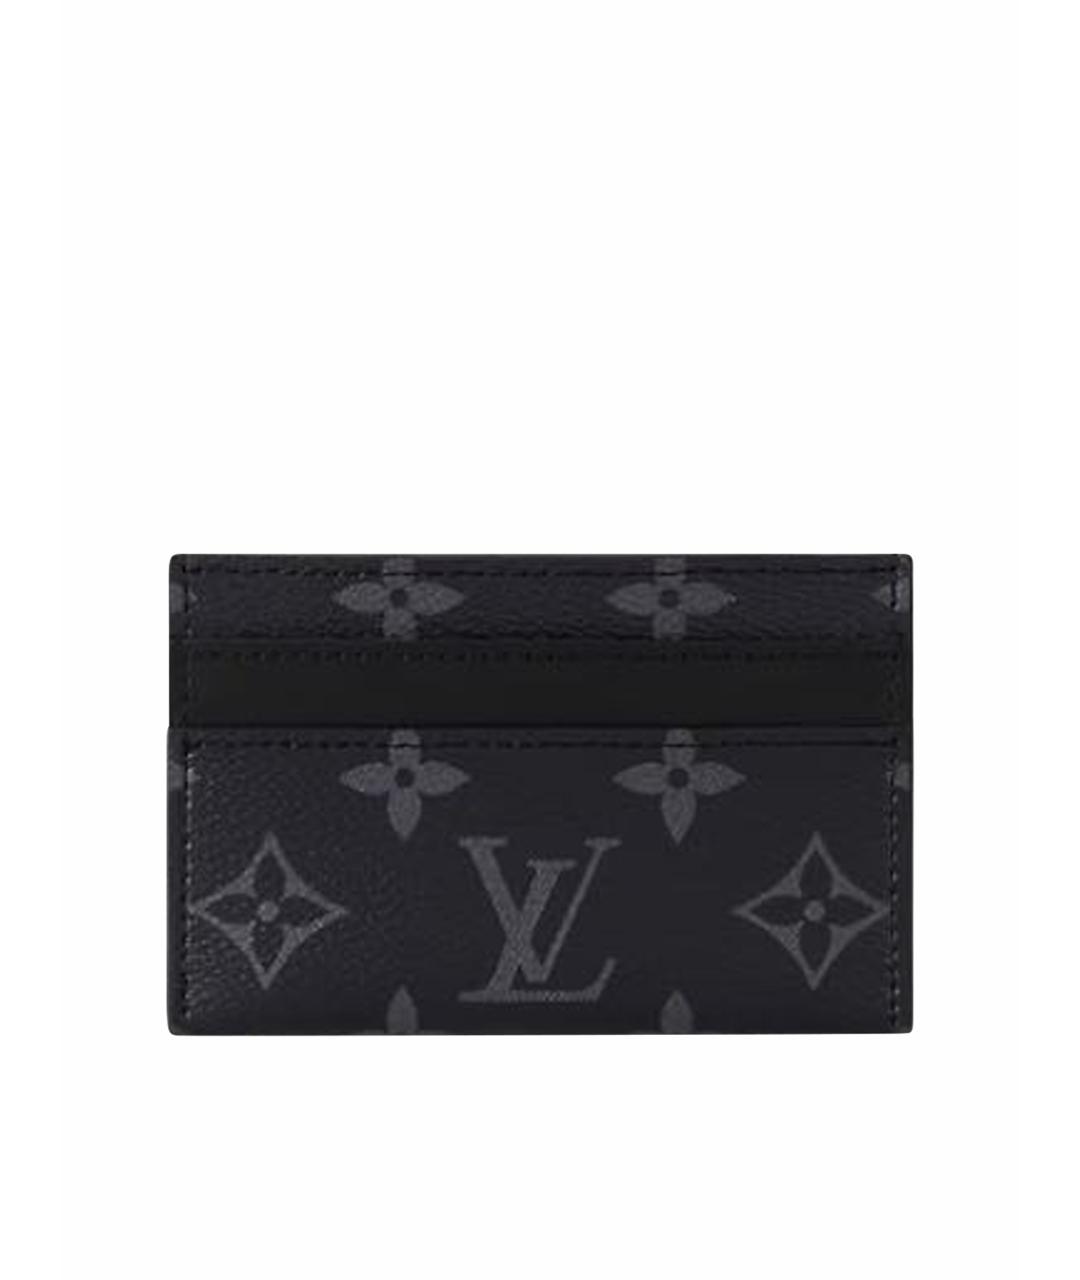 LOUIS VUITTON PRE-OWNED Черный кардхолдер, фото 1